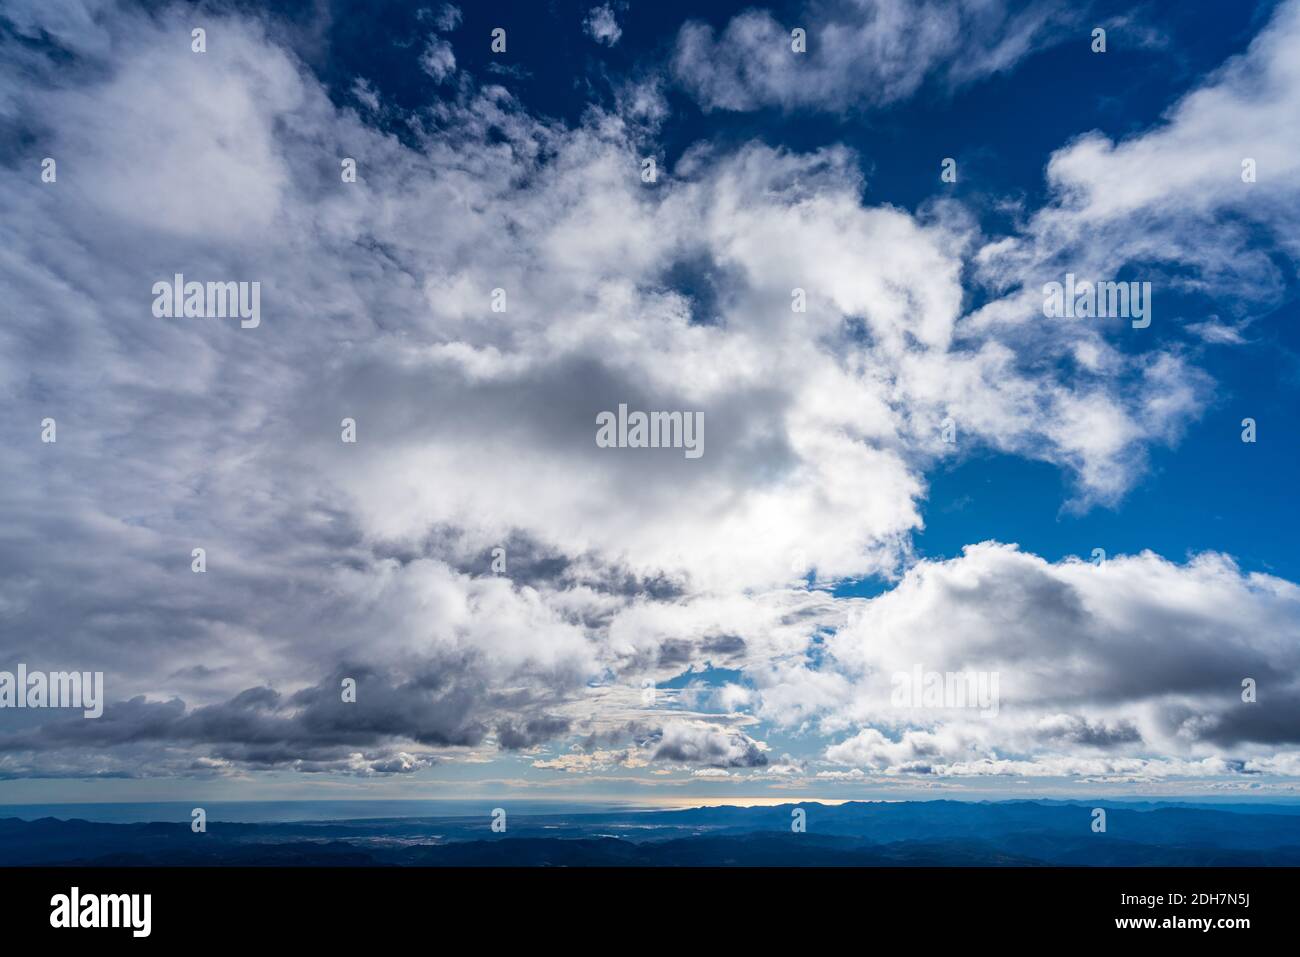 Sky background with ocean in the skyline Stock Photo